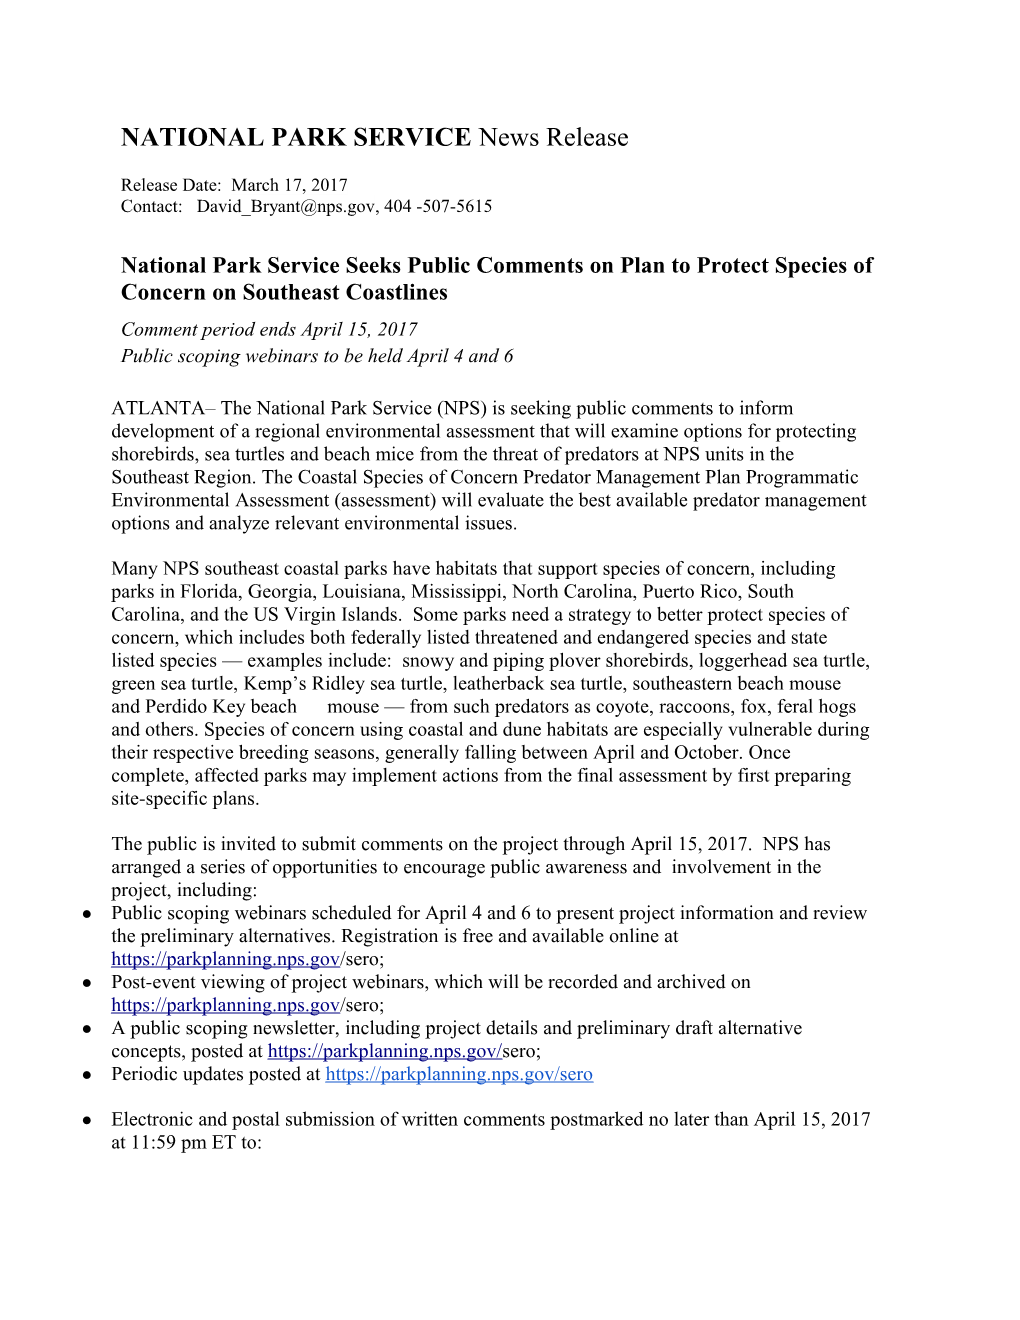 NATIONAL PARK SERVICE News Release s2